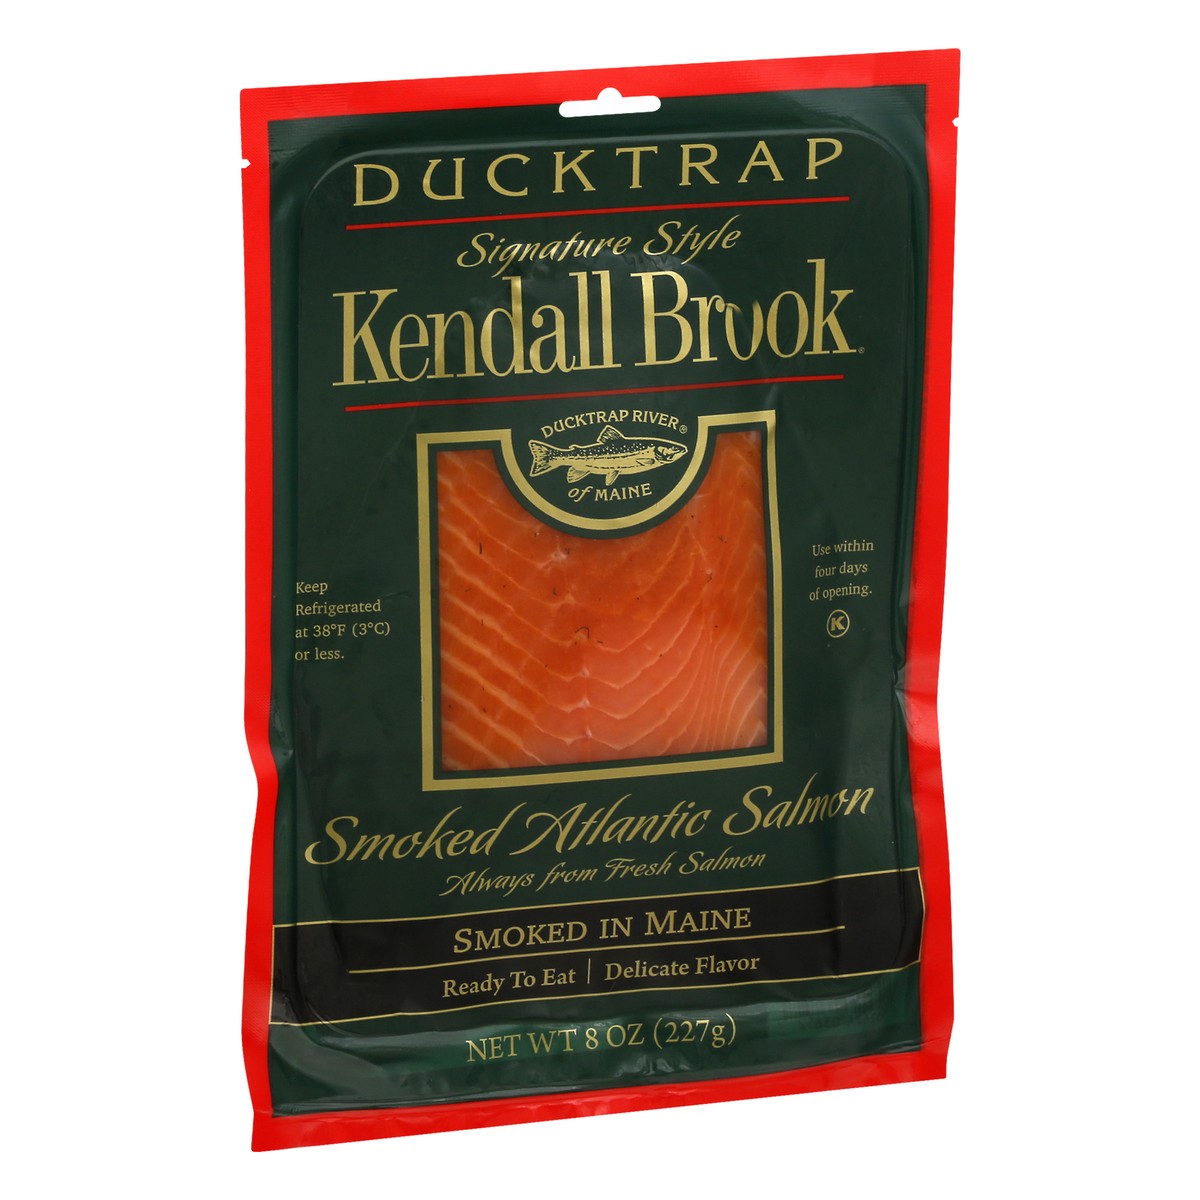 slide 2 of 9, Ducktrap River of Maine Kendall Brook Signature Style Smoked Atlantic Salmon 8 oz, 8 oz